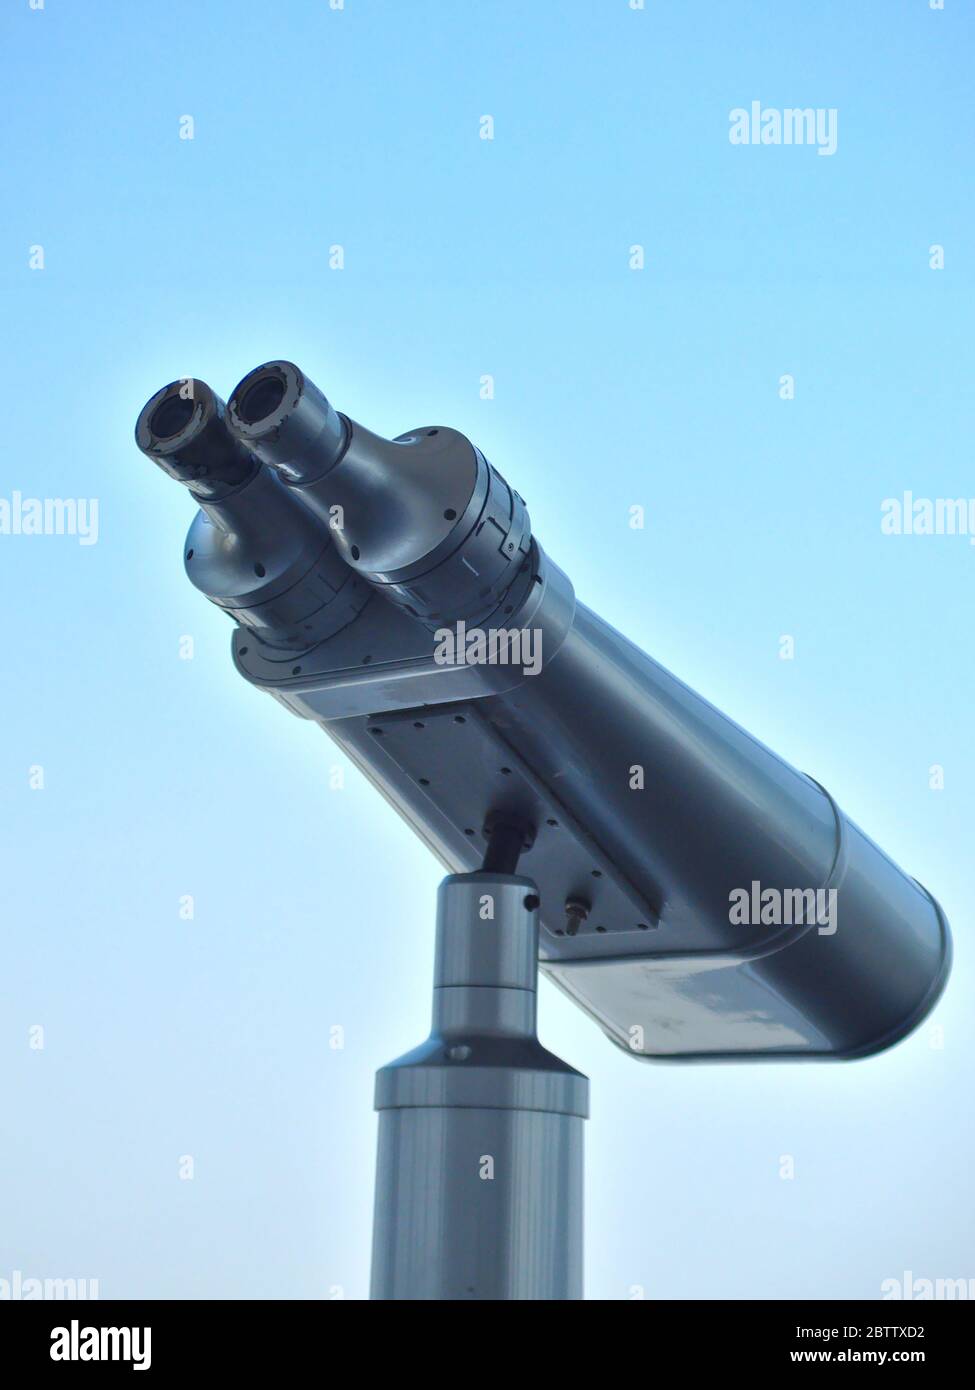 Large Binocular Telescope High Resolution Stock Photography and Images -  Alamy